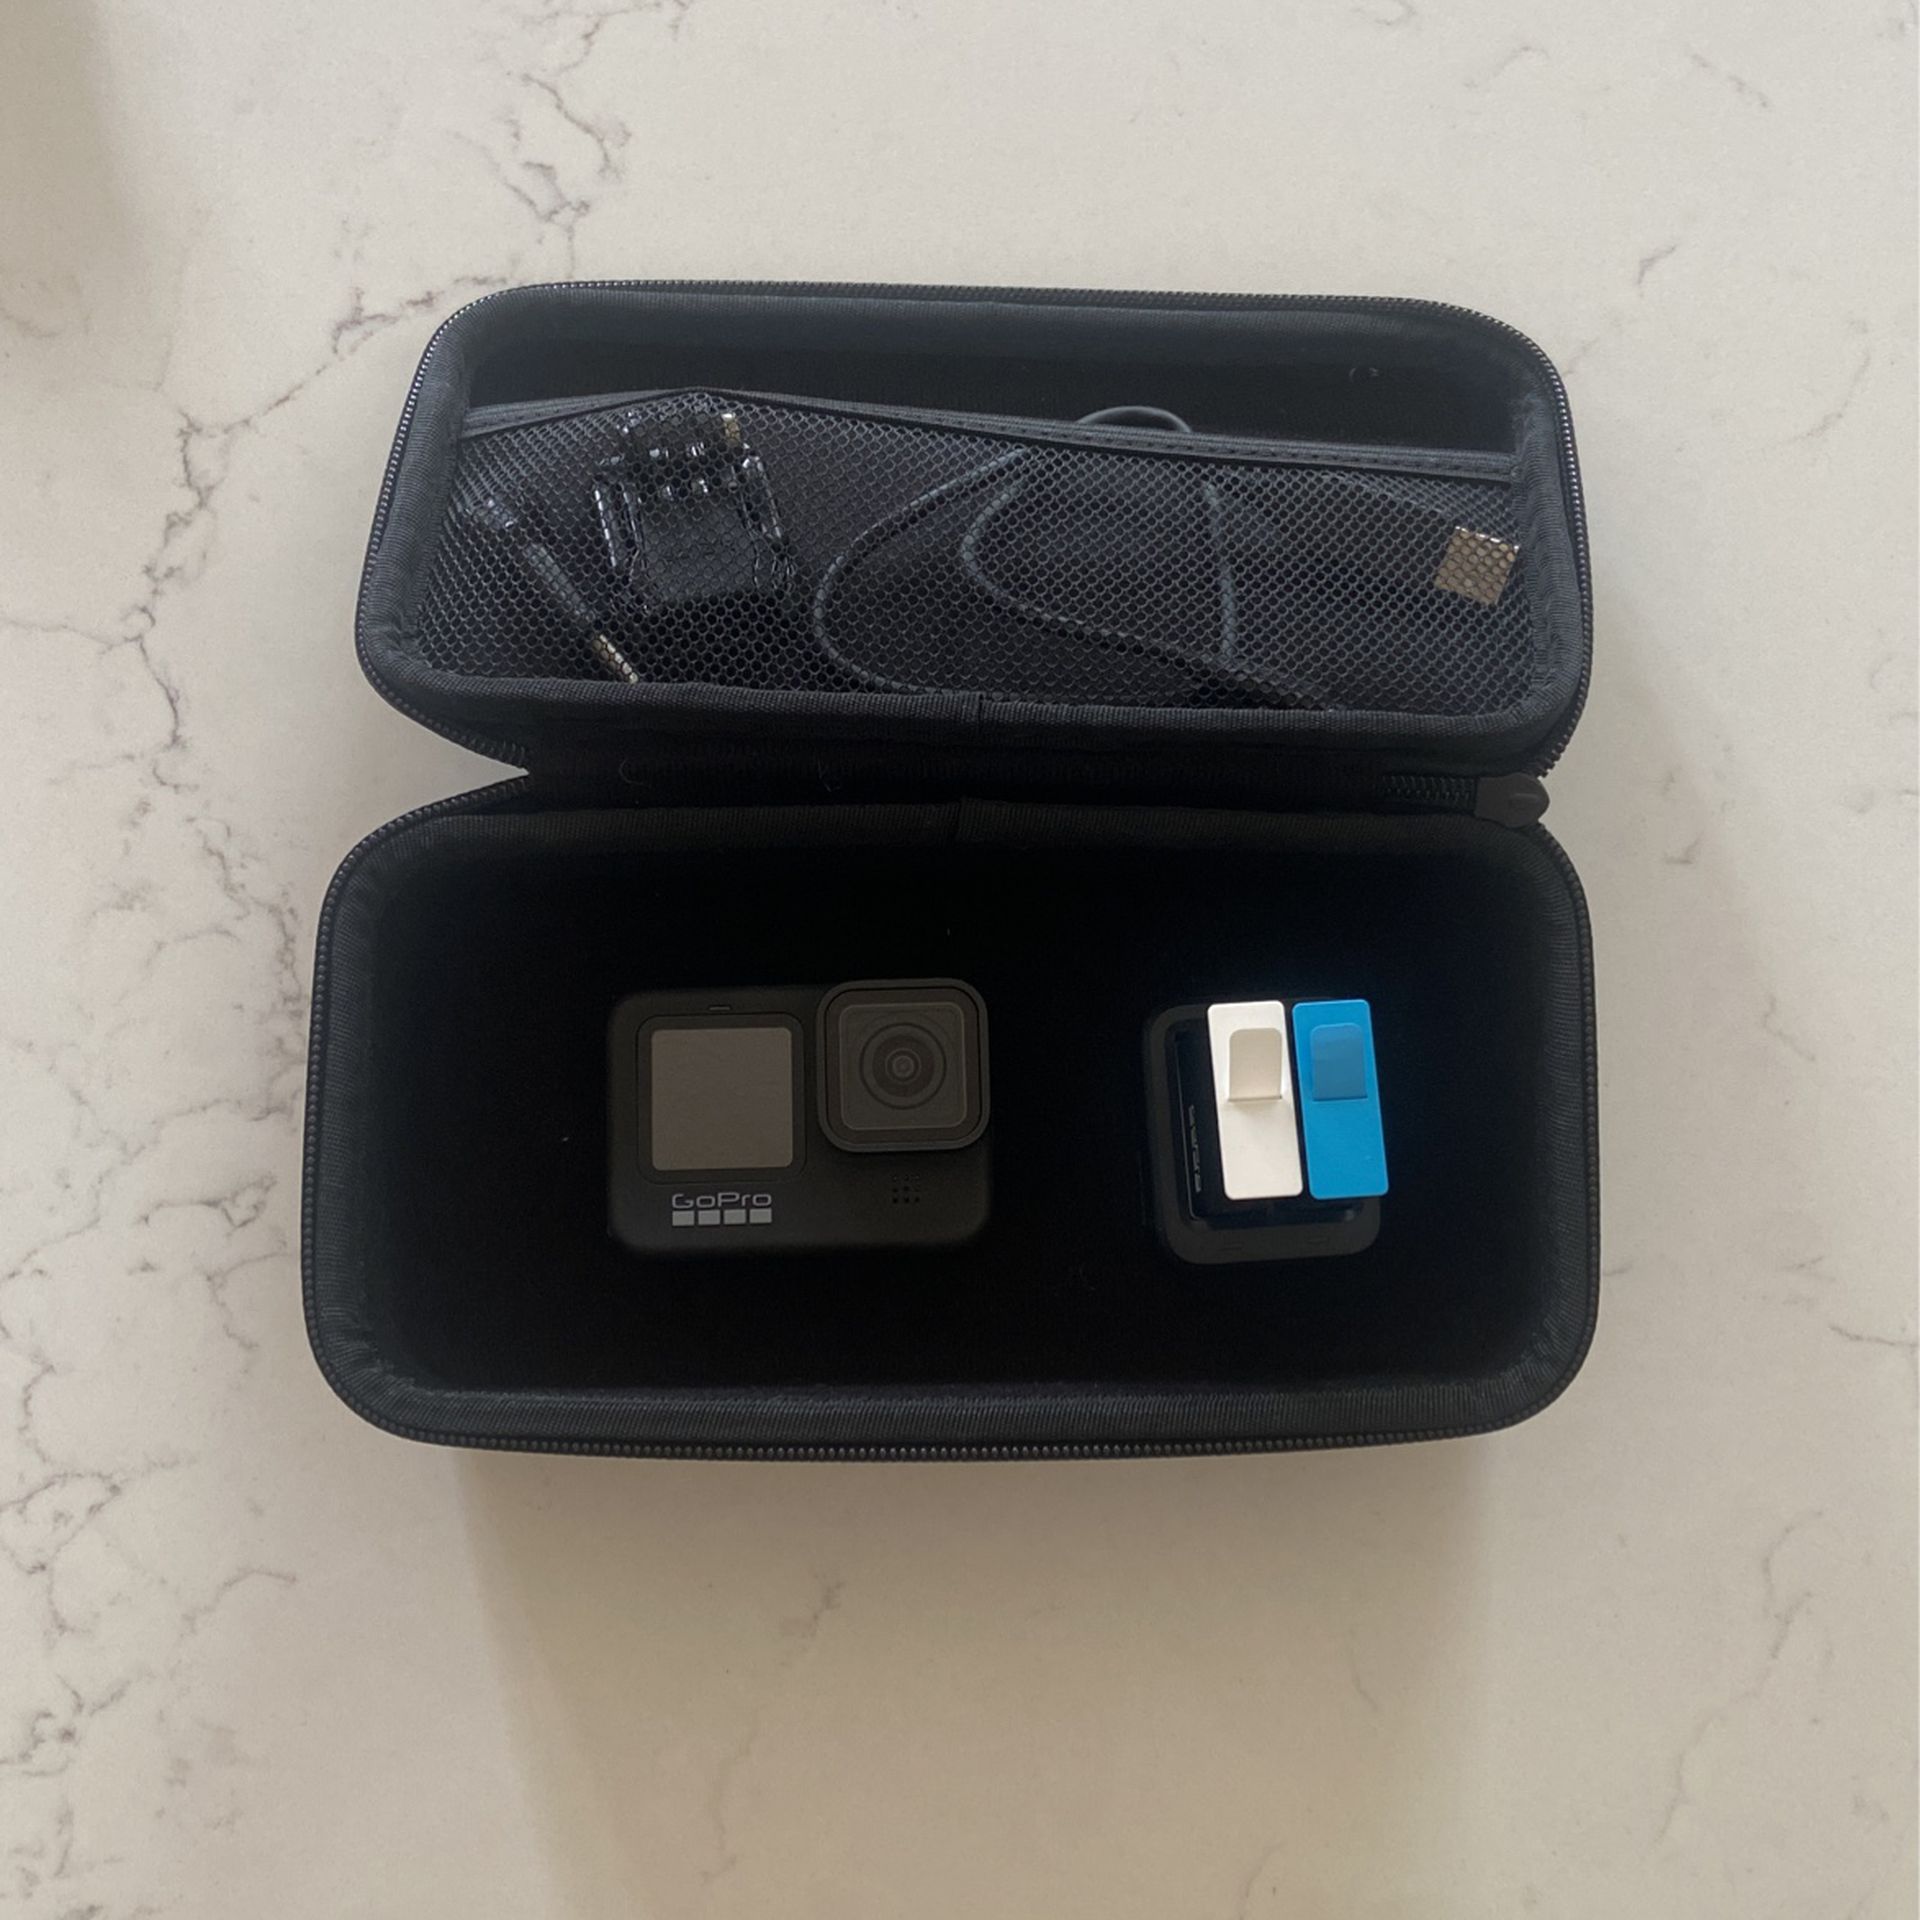 Hero9 Black GoPro (brand New With Case And Batteries)